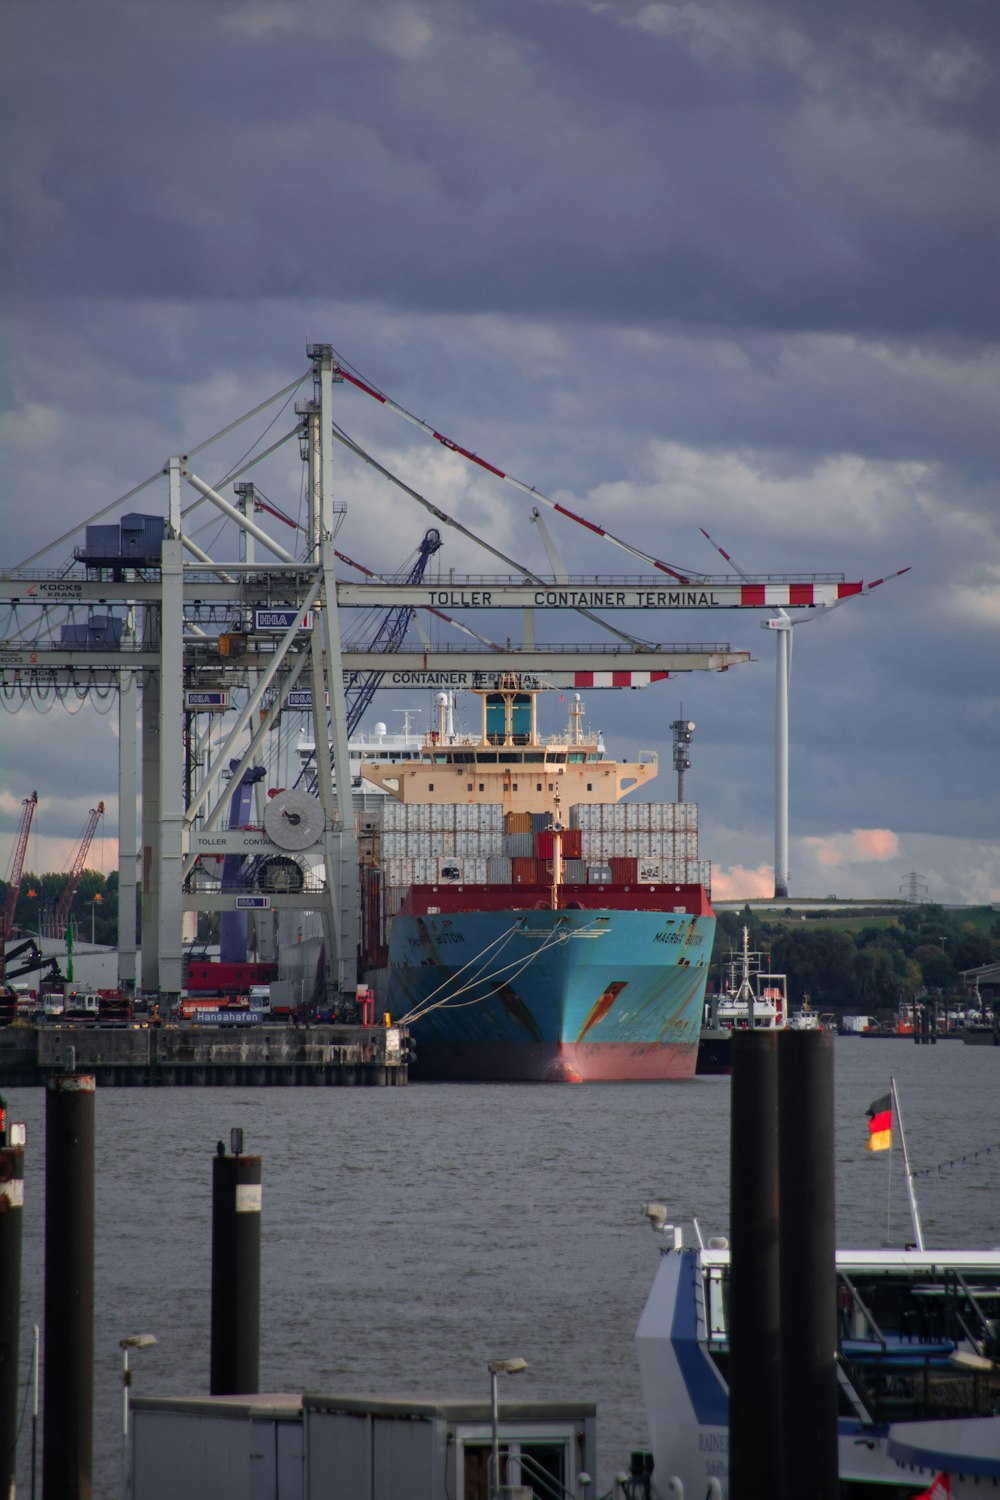 red and white cargo ship on dock during daytime